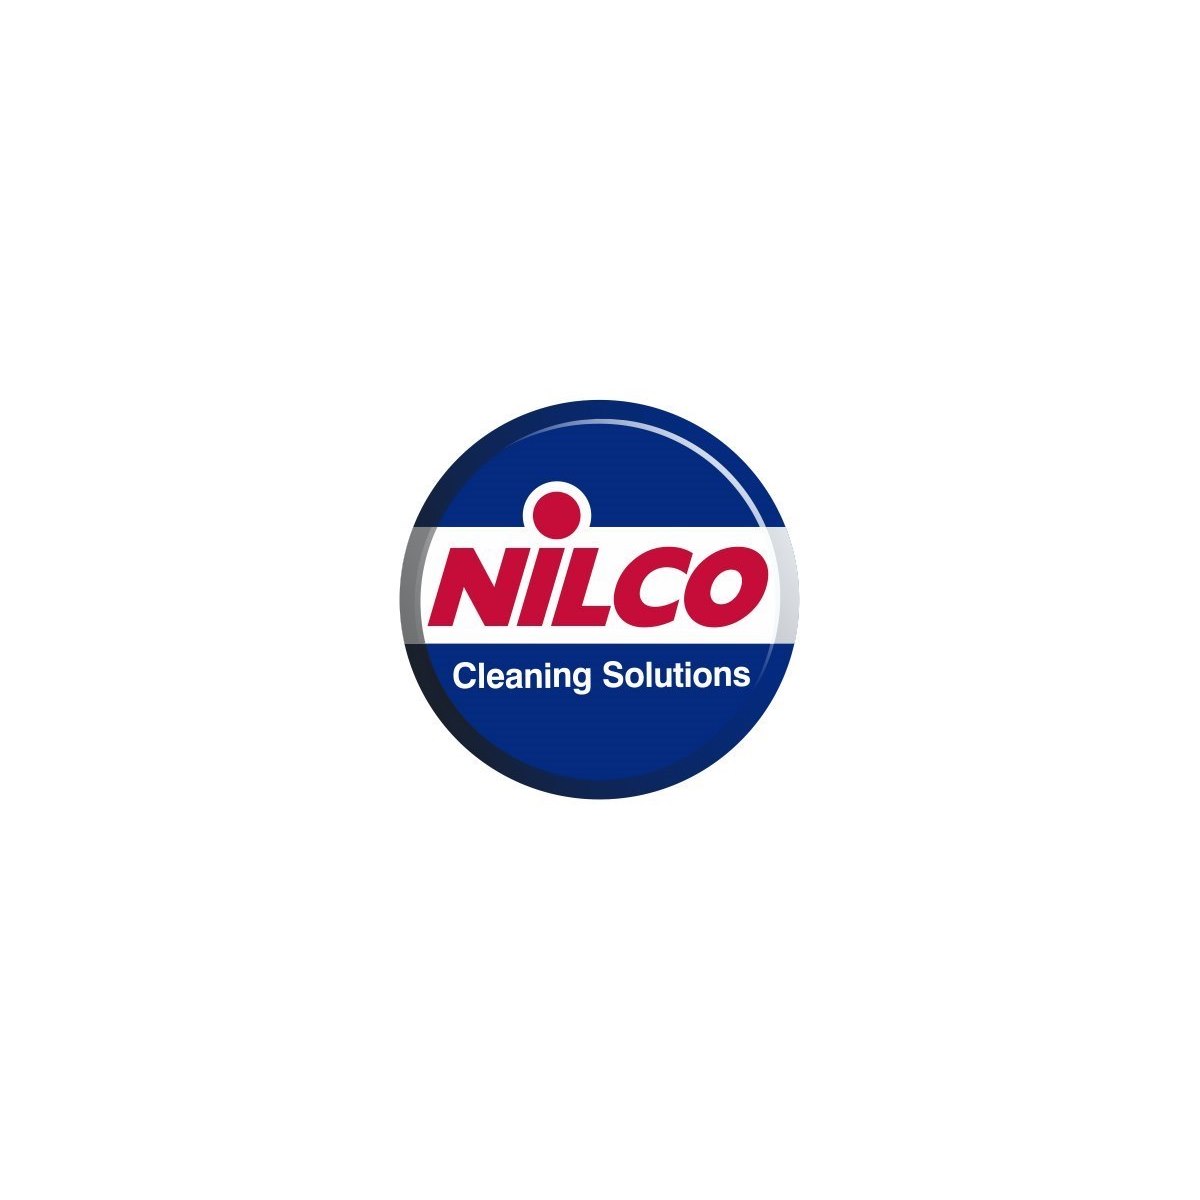 Where to Buy Nilco Products